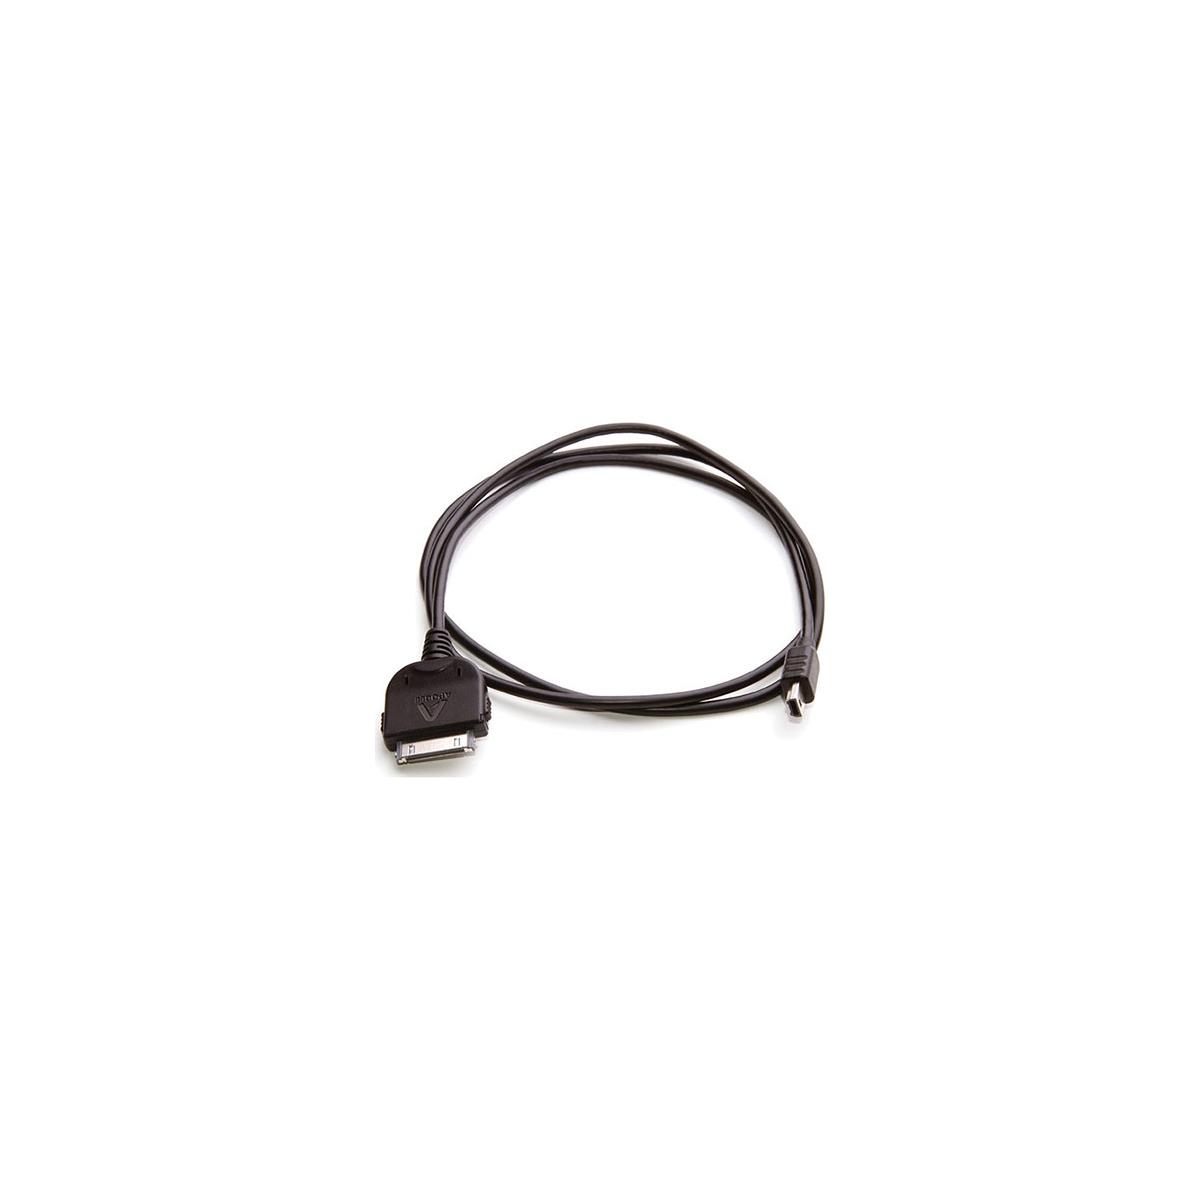 Image of Apogee Electronics 3.2'/1m iPad/iPhone 30-pin Cable